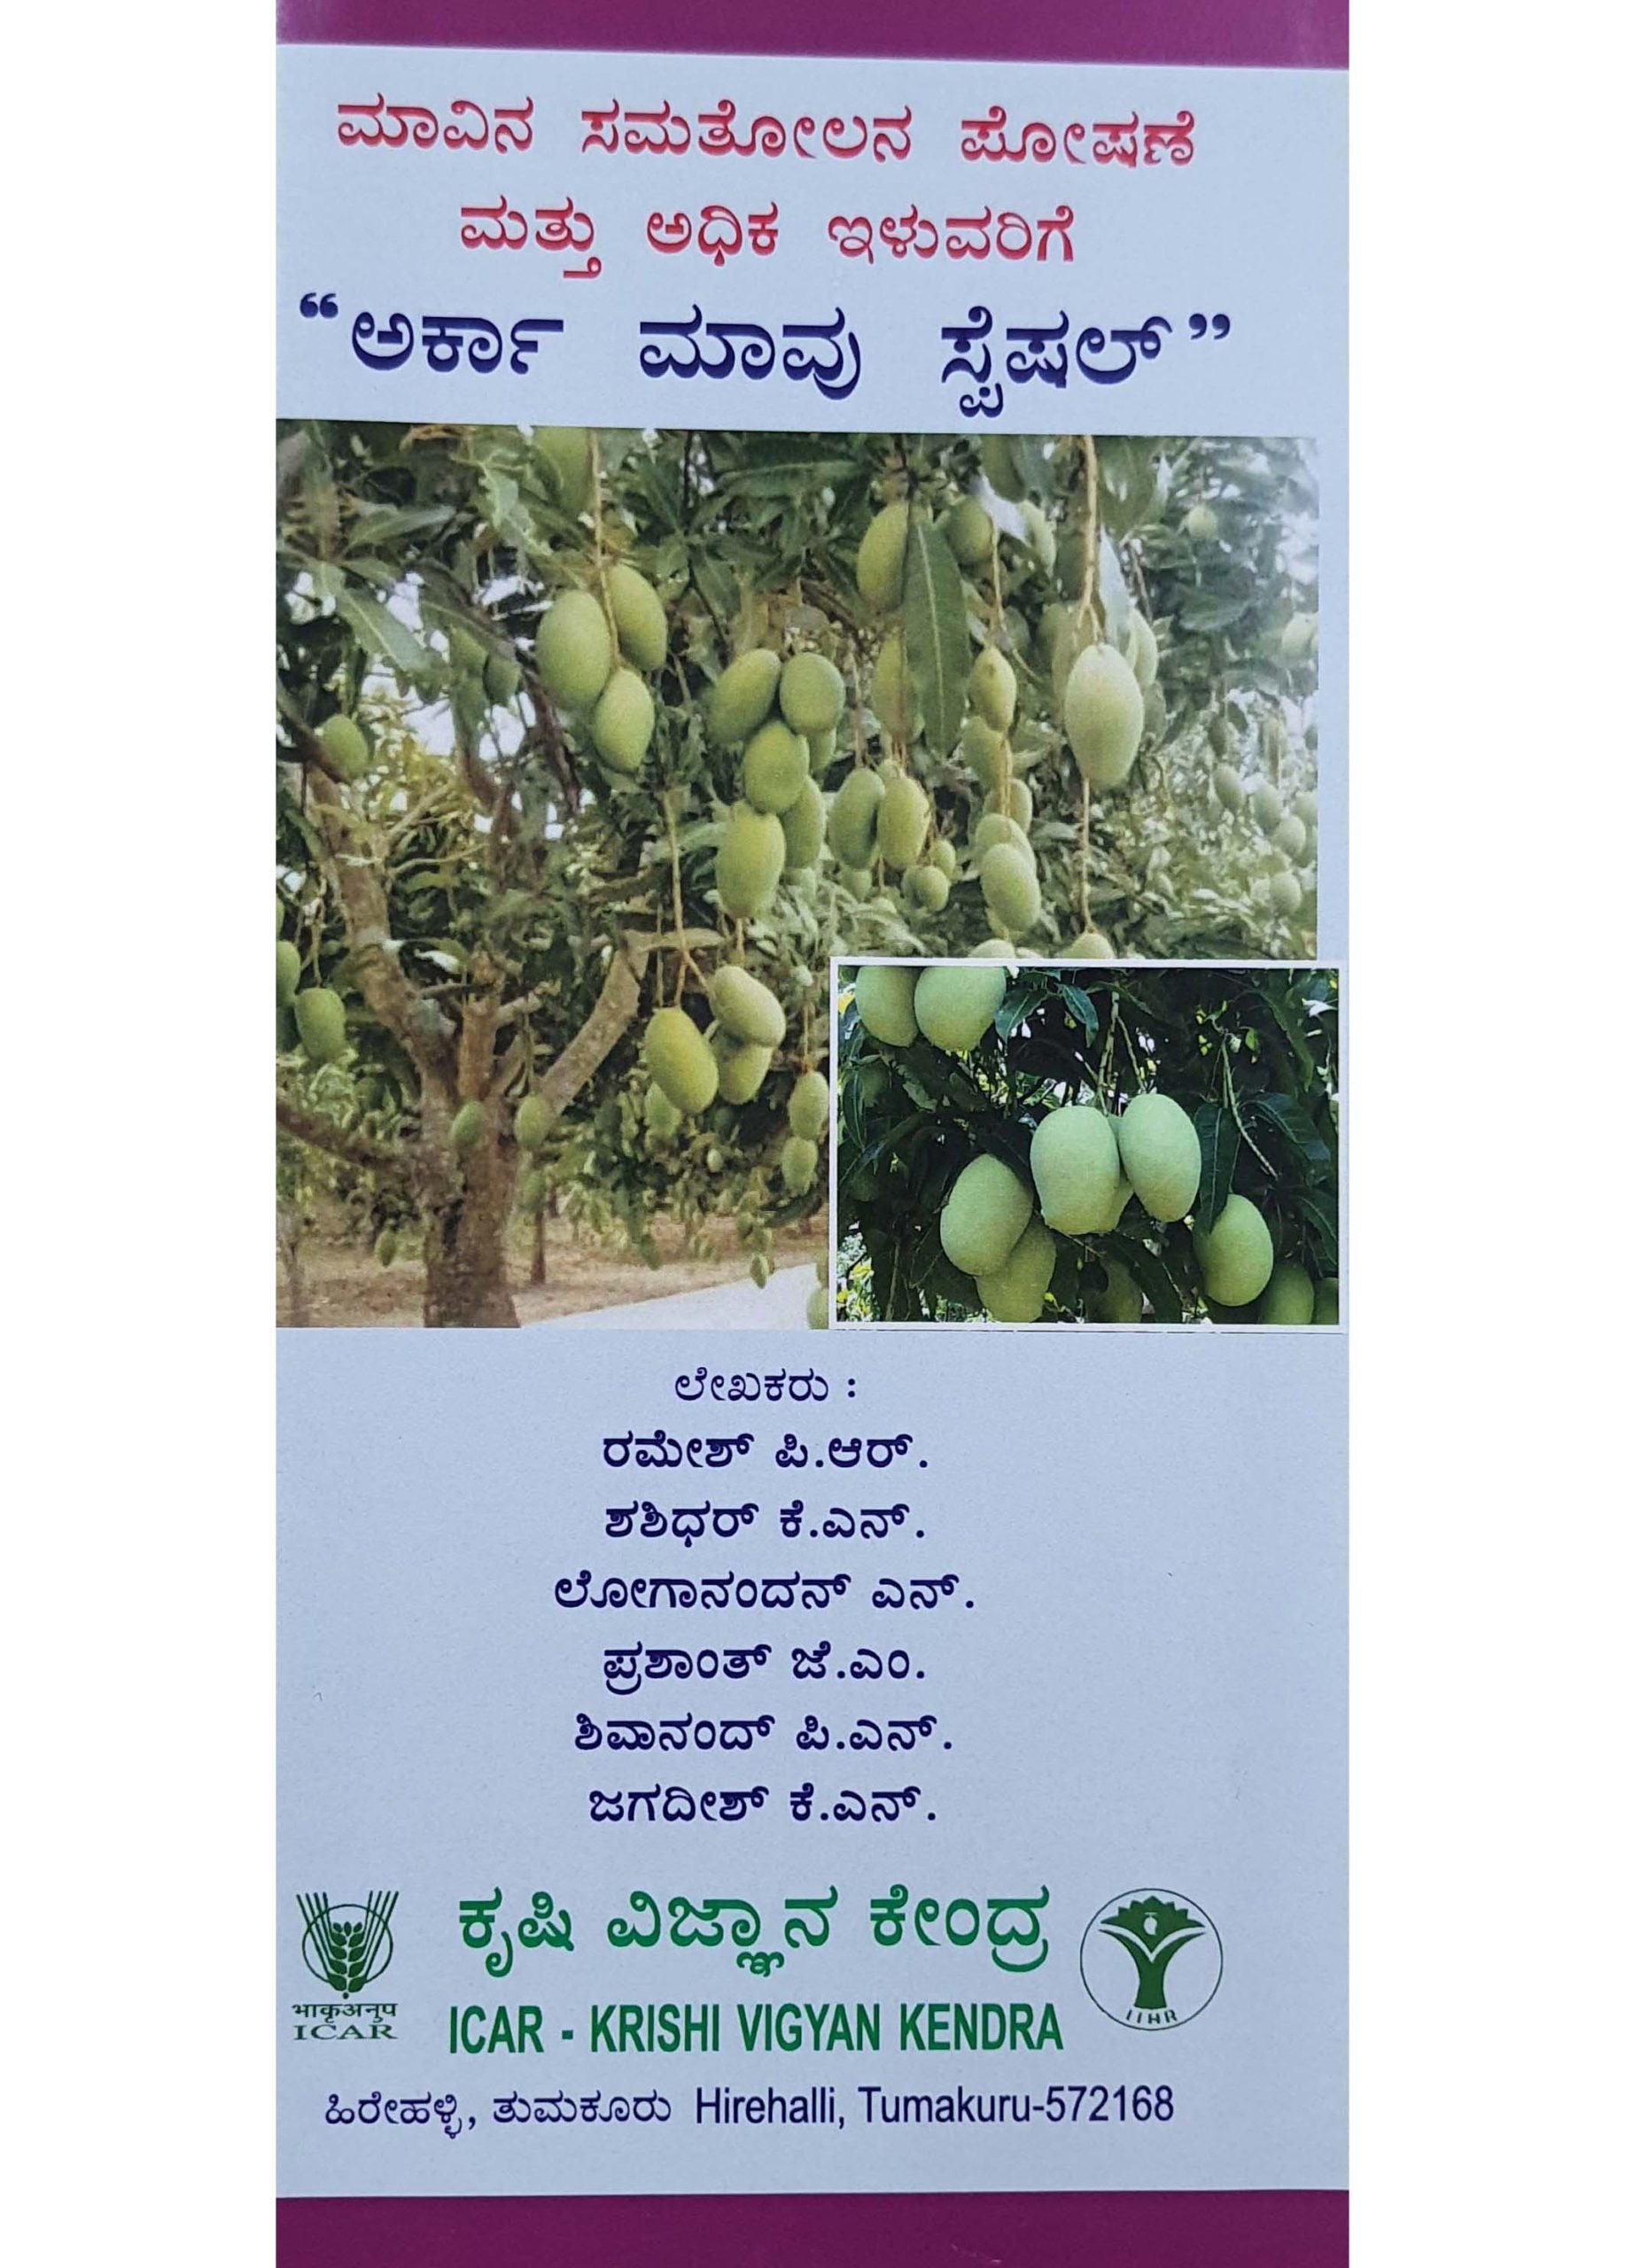 Arka Mango Special_Balanced Nutrition and High Yield